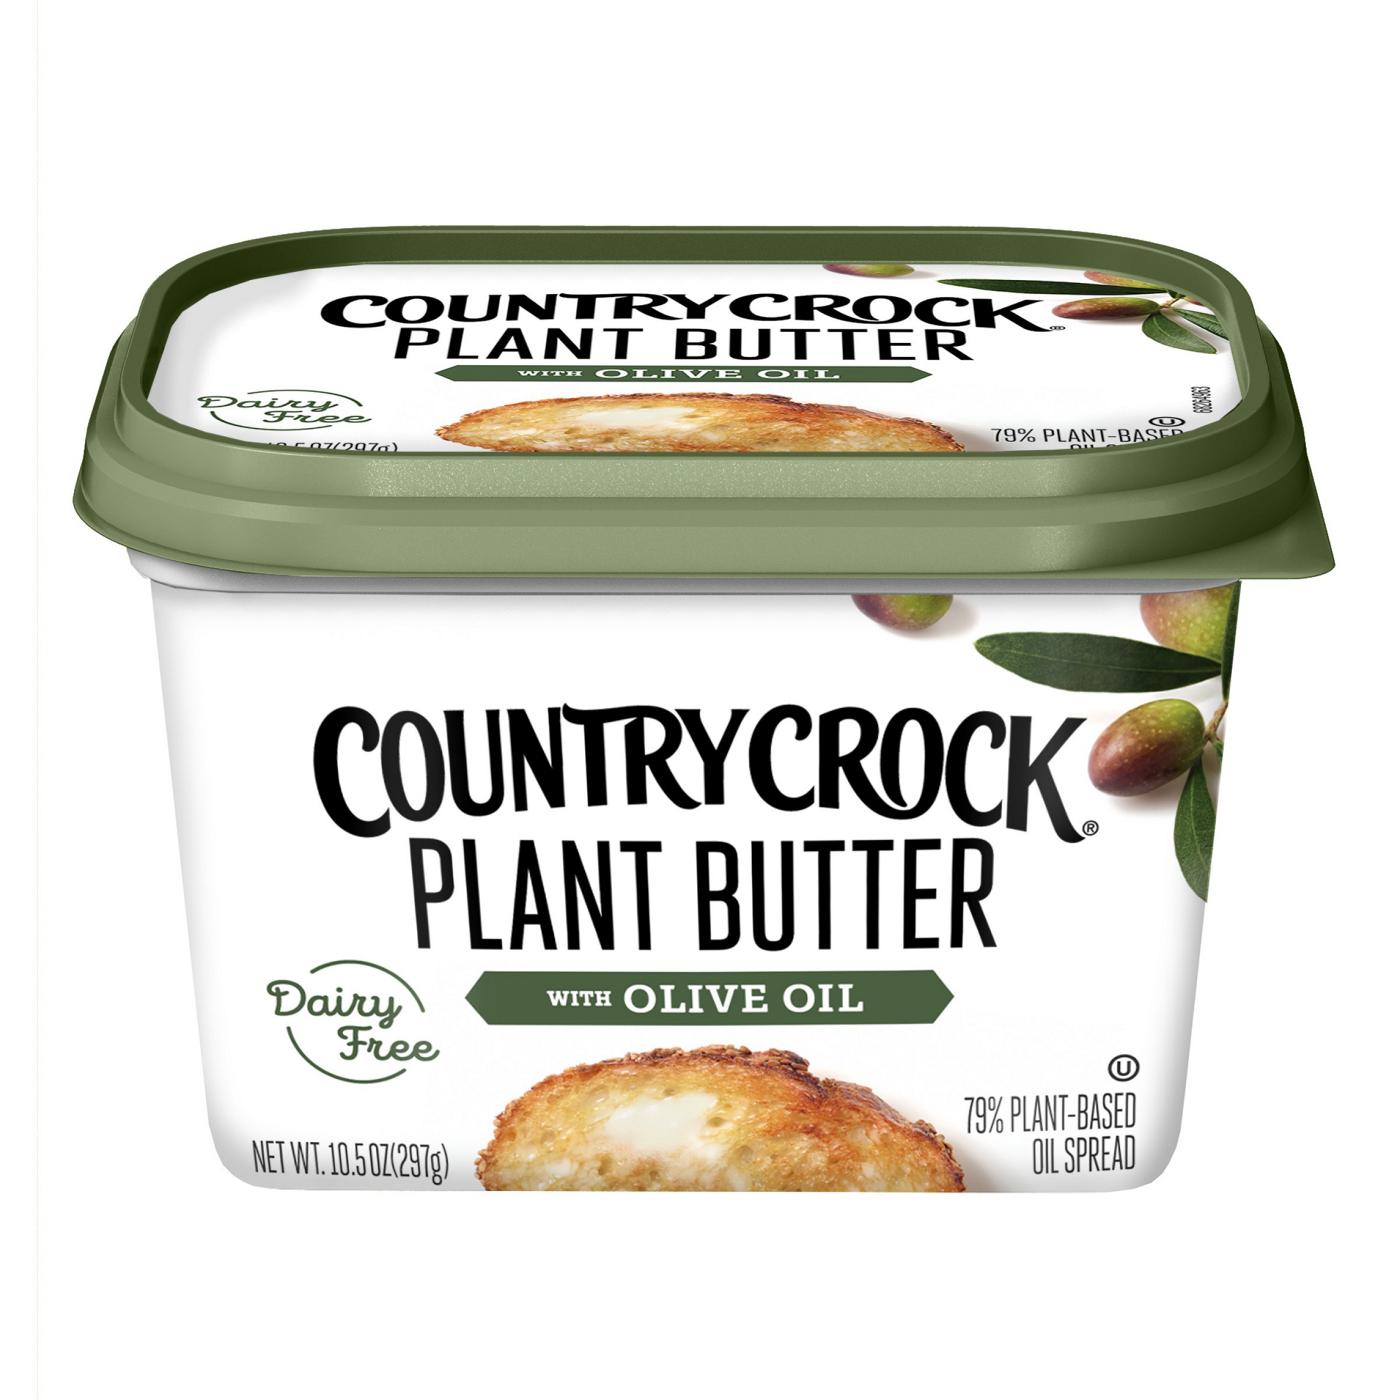 Country Crock Dairy Free Plant Butter with Olive Oil Spread; image 4 of 10